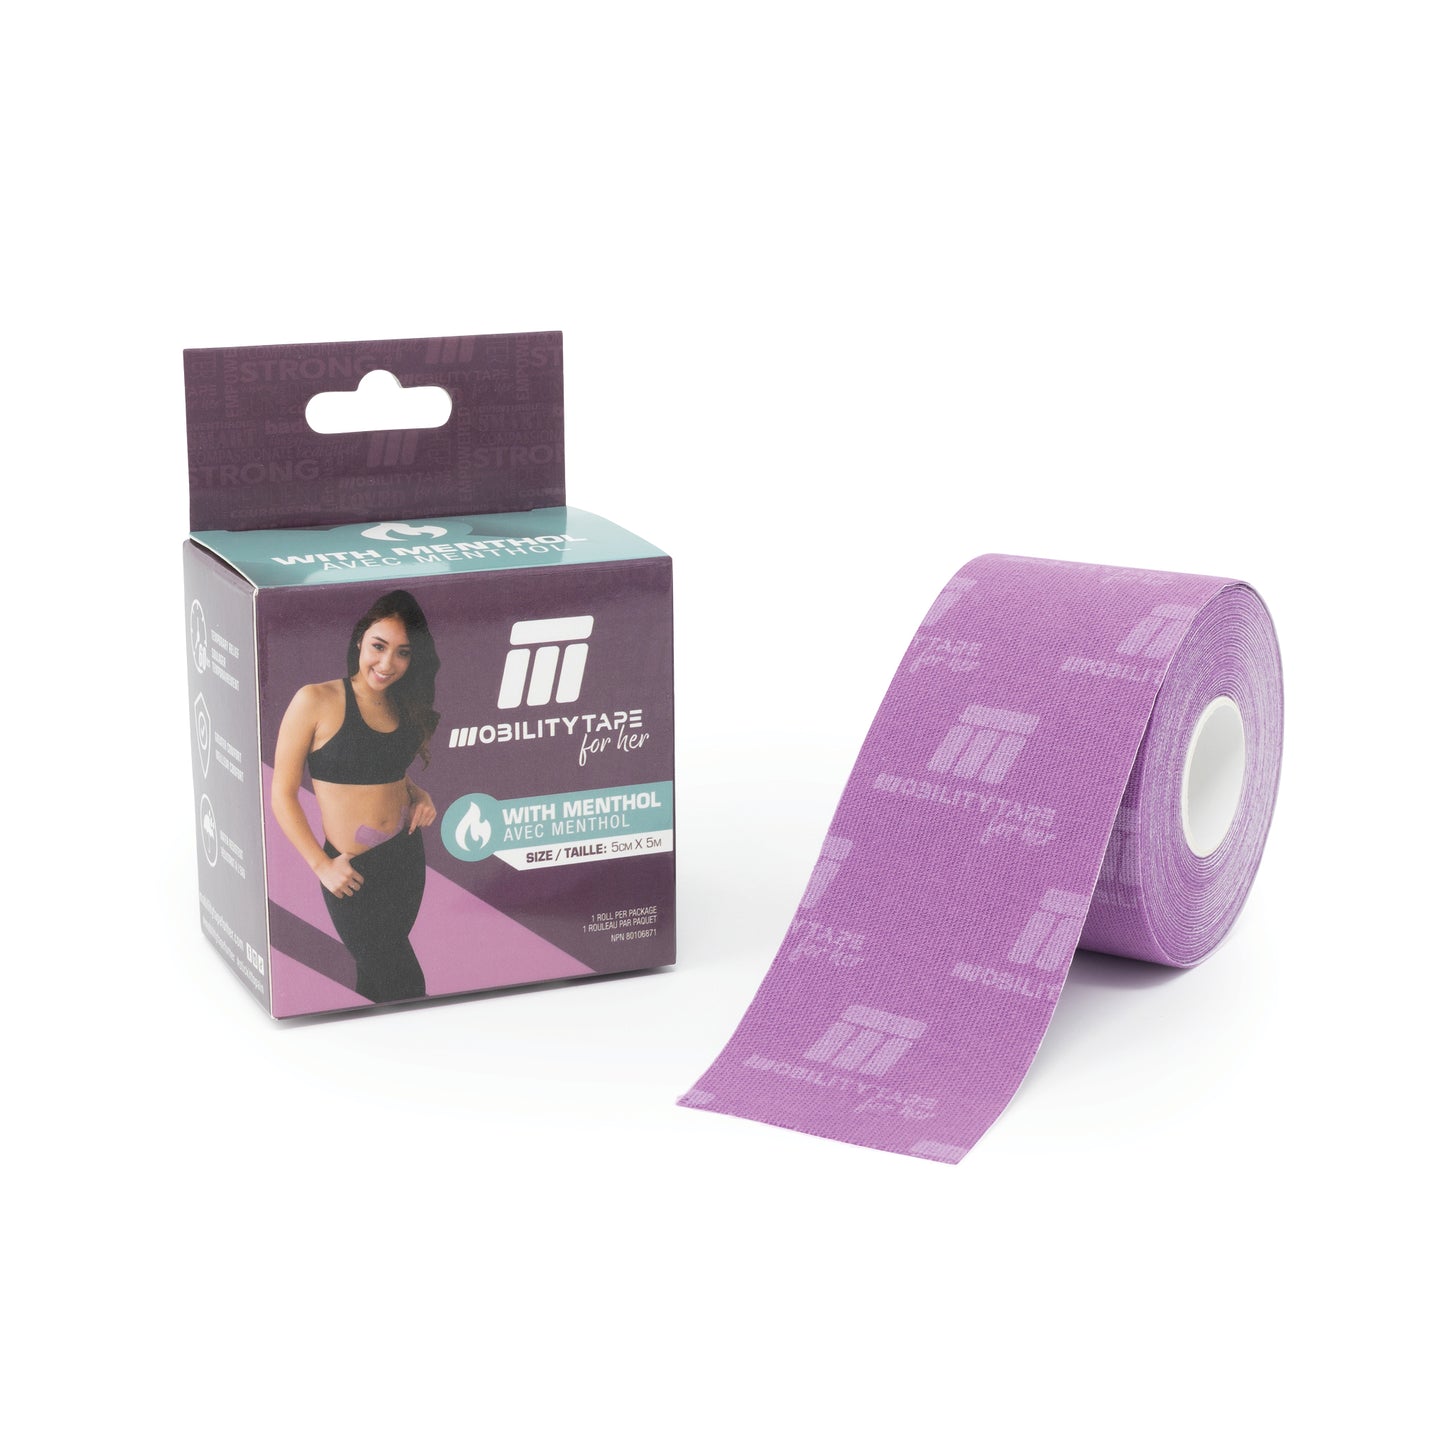 Mobility Tape for Her